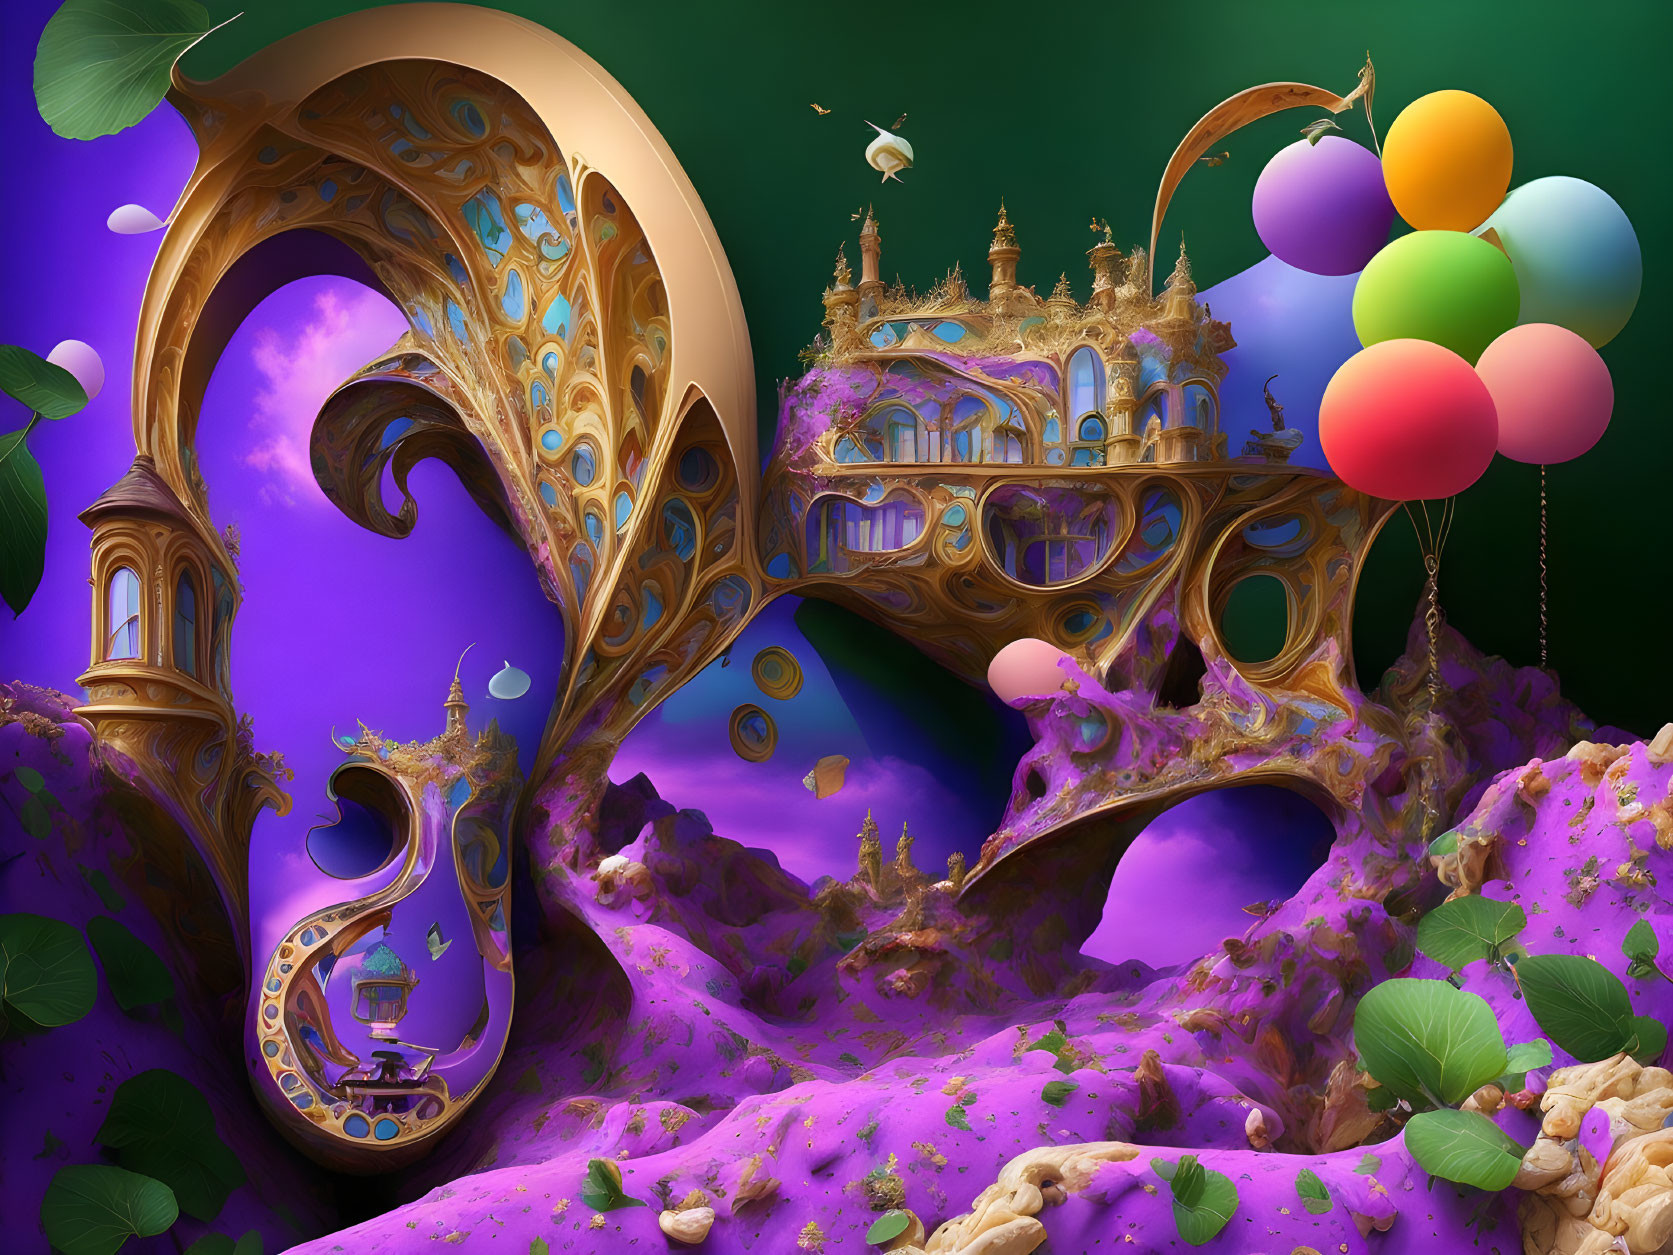 Surrealist artwork with fantastical architecture, balloons, bird, and lush greenery